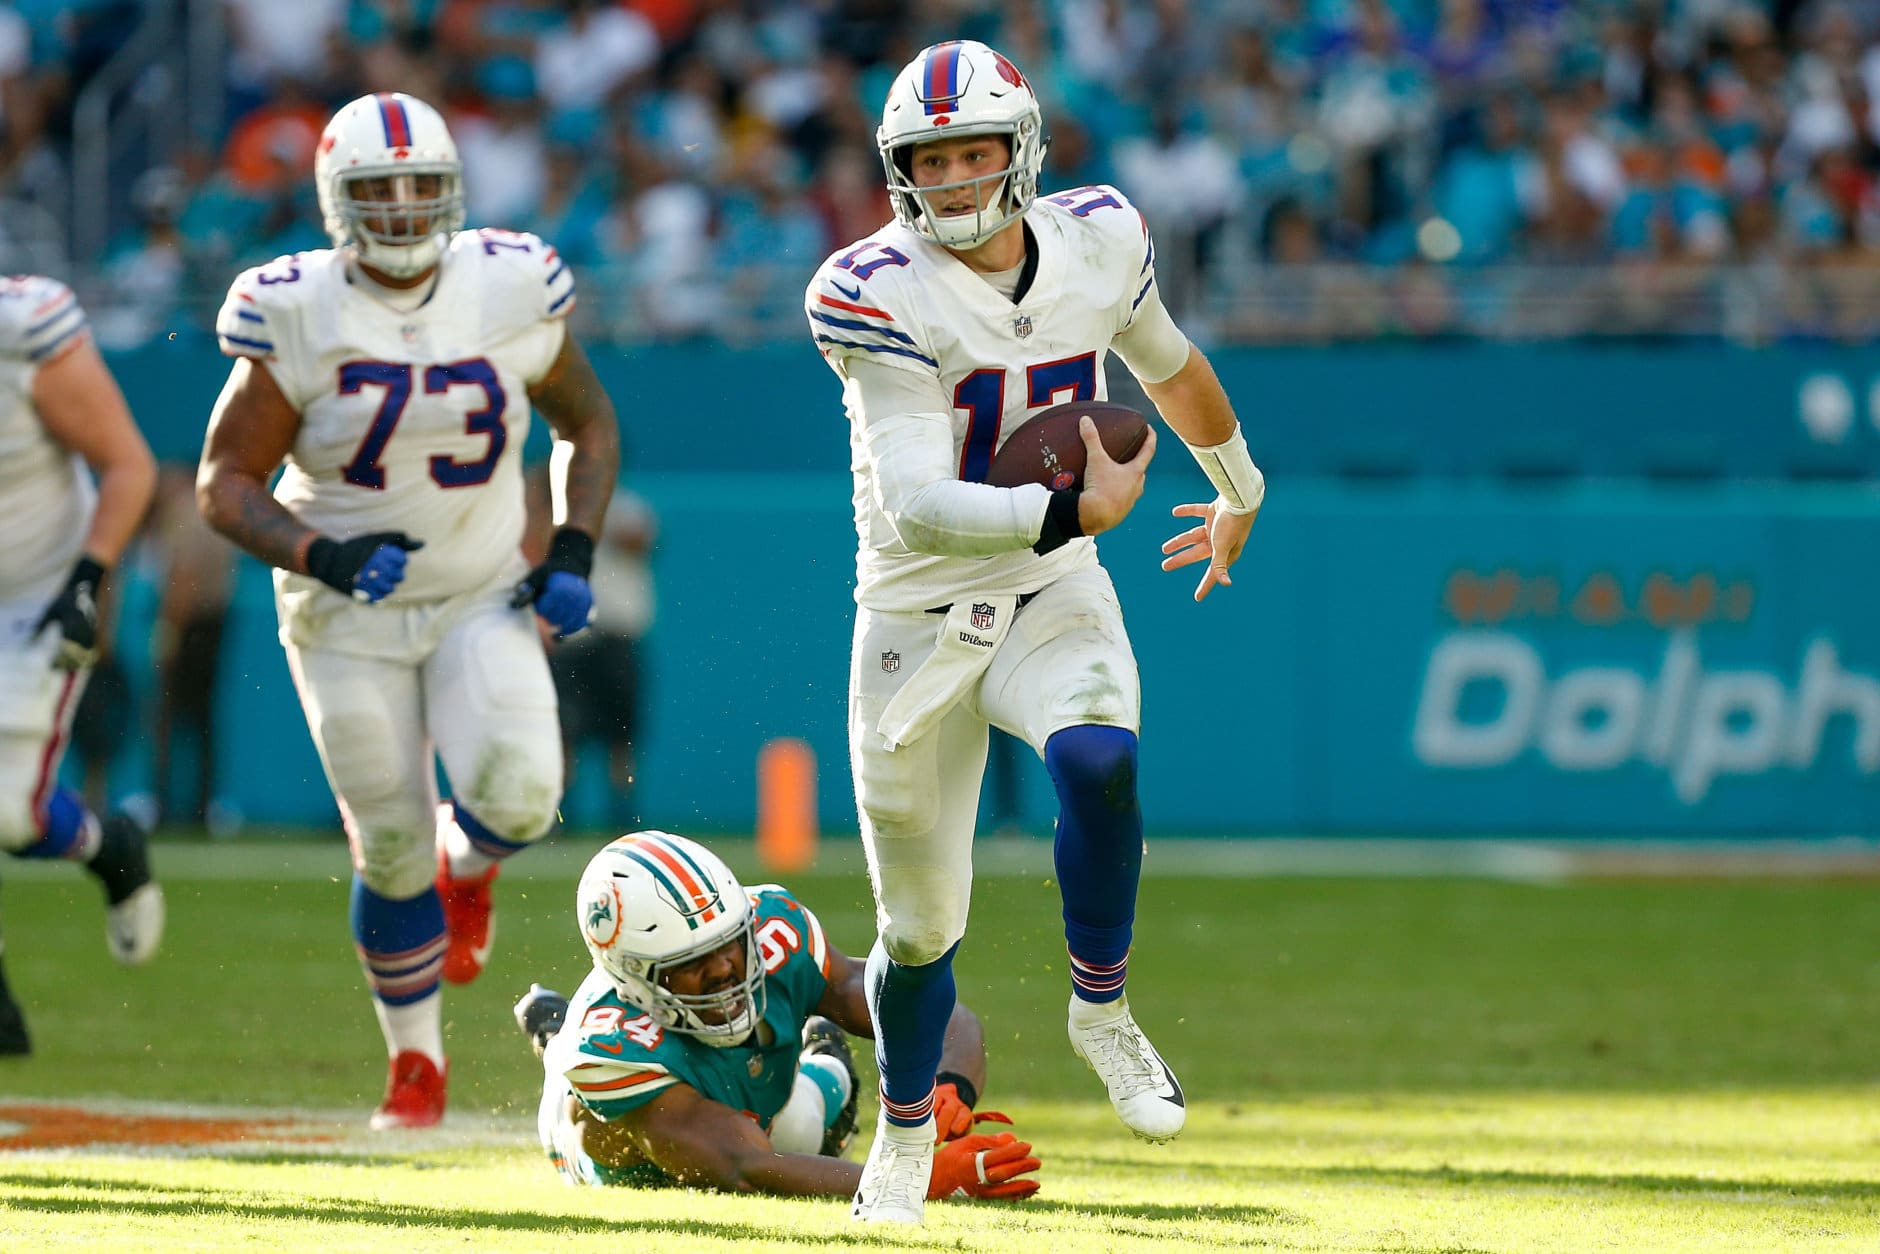 MIAMI, FL - DECEMBER 02:  Josh Allen #17 of the Buffalo Bills runs with the ball against the Miami Dolphins during the first half at Hard Rock Stadium on December 2, 2018 in Miami, Florida.  (Photo by Michael Reaves/Getty Images)